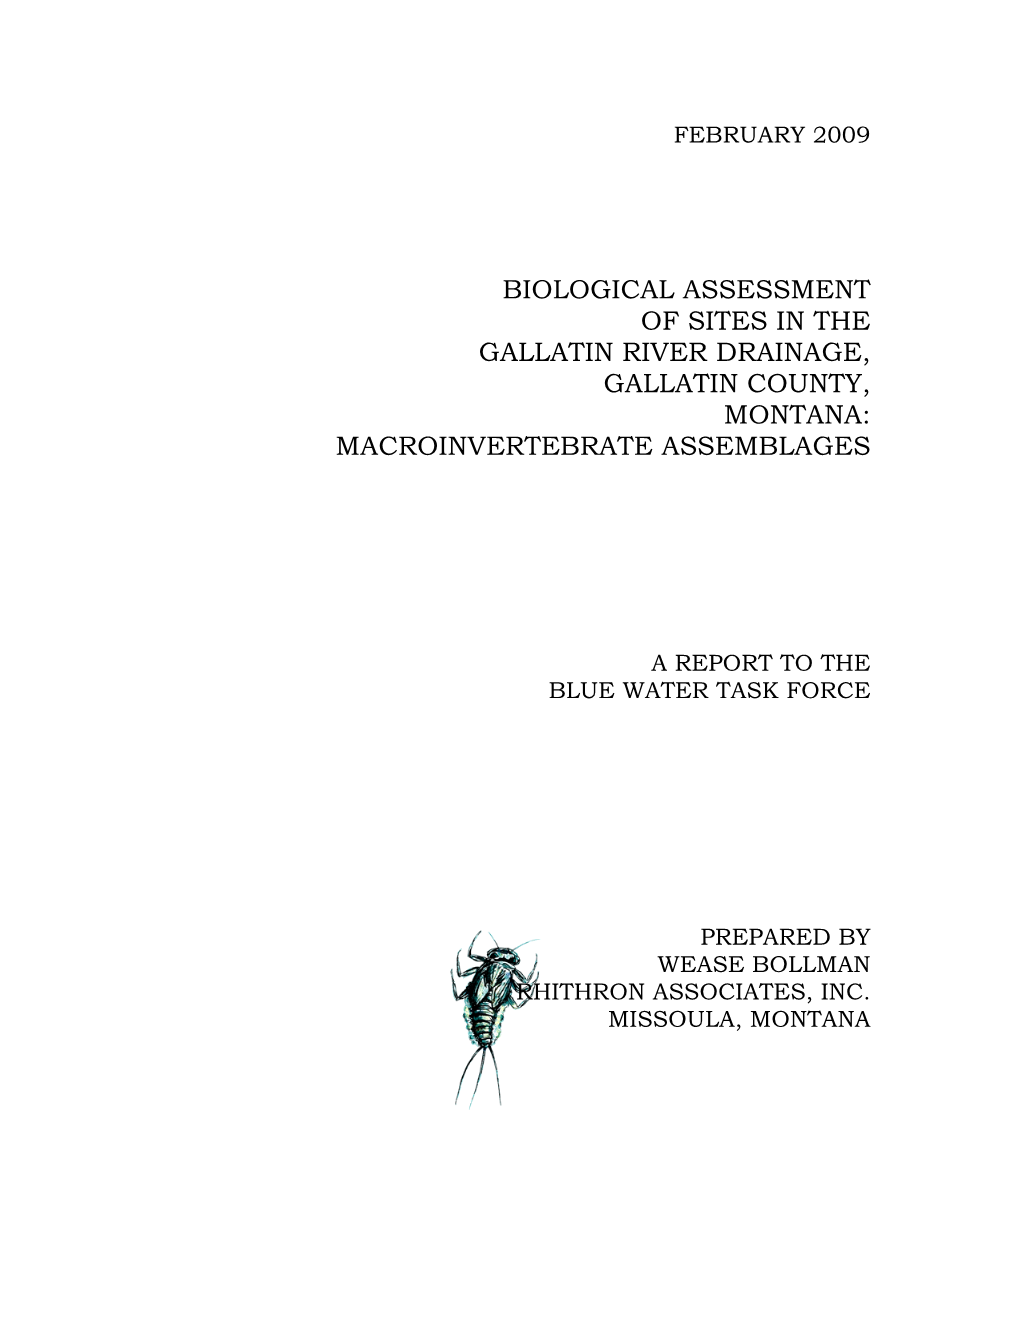 Biological Assessment of Sites in the Gallatin River Drainage, Gallatin County, Montana: Macroinvertebrate Assemblages